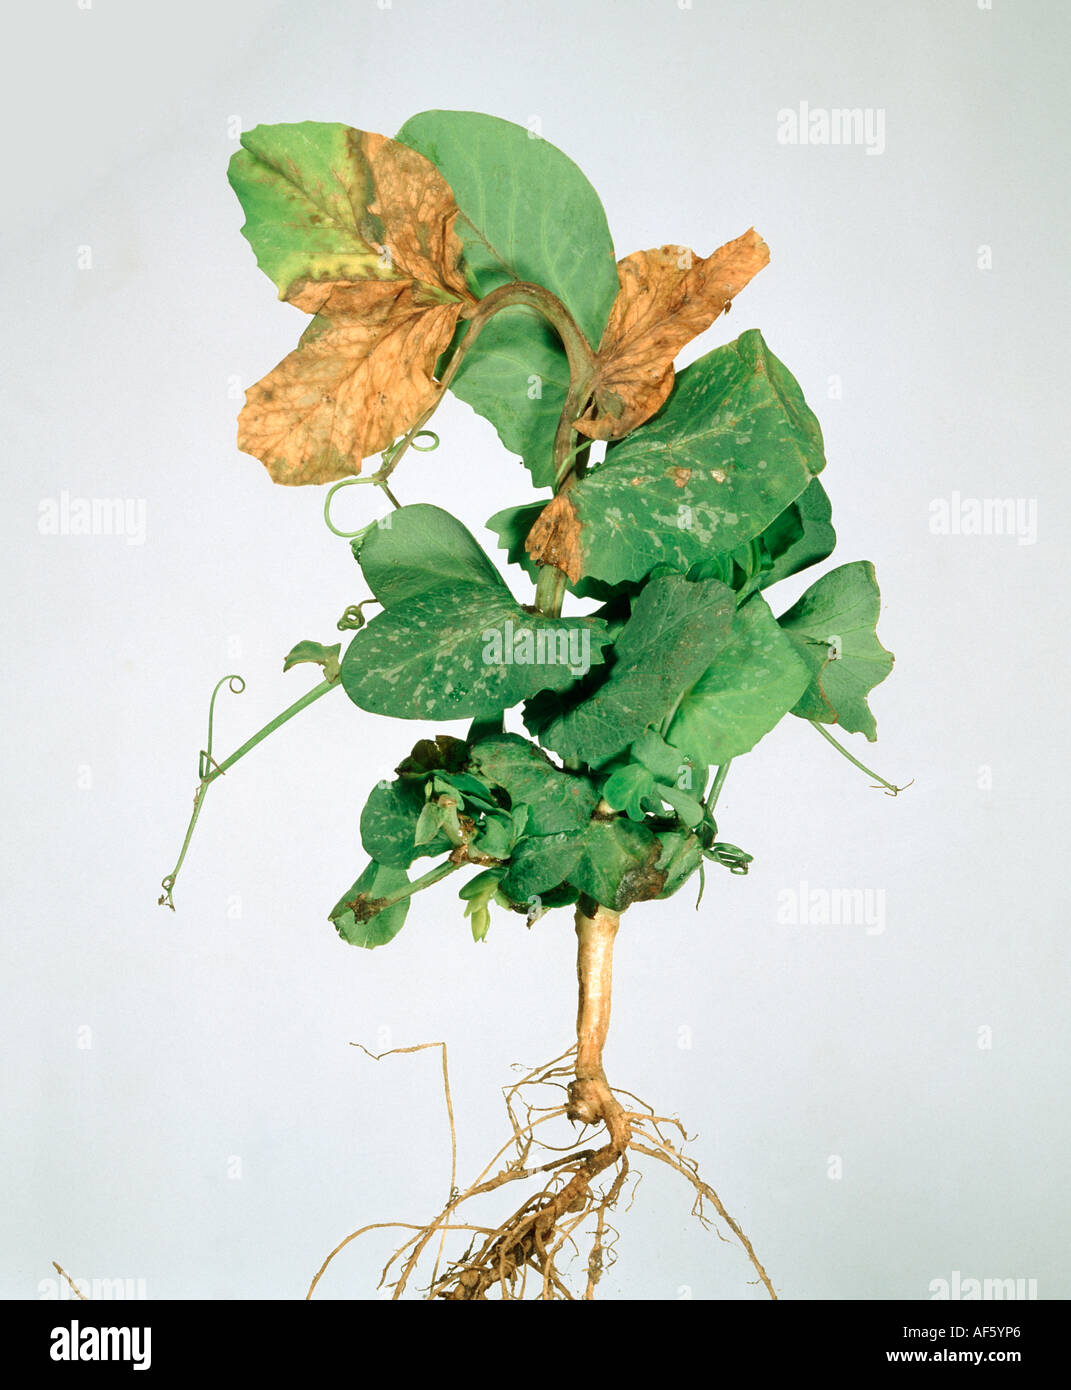 Leaf marbling on pea plant caused by pea early browning virus PEBV Stock Photo